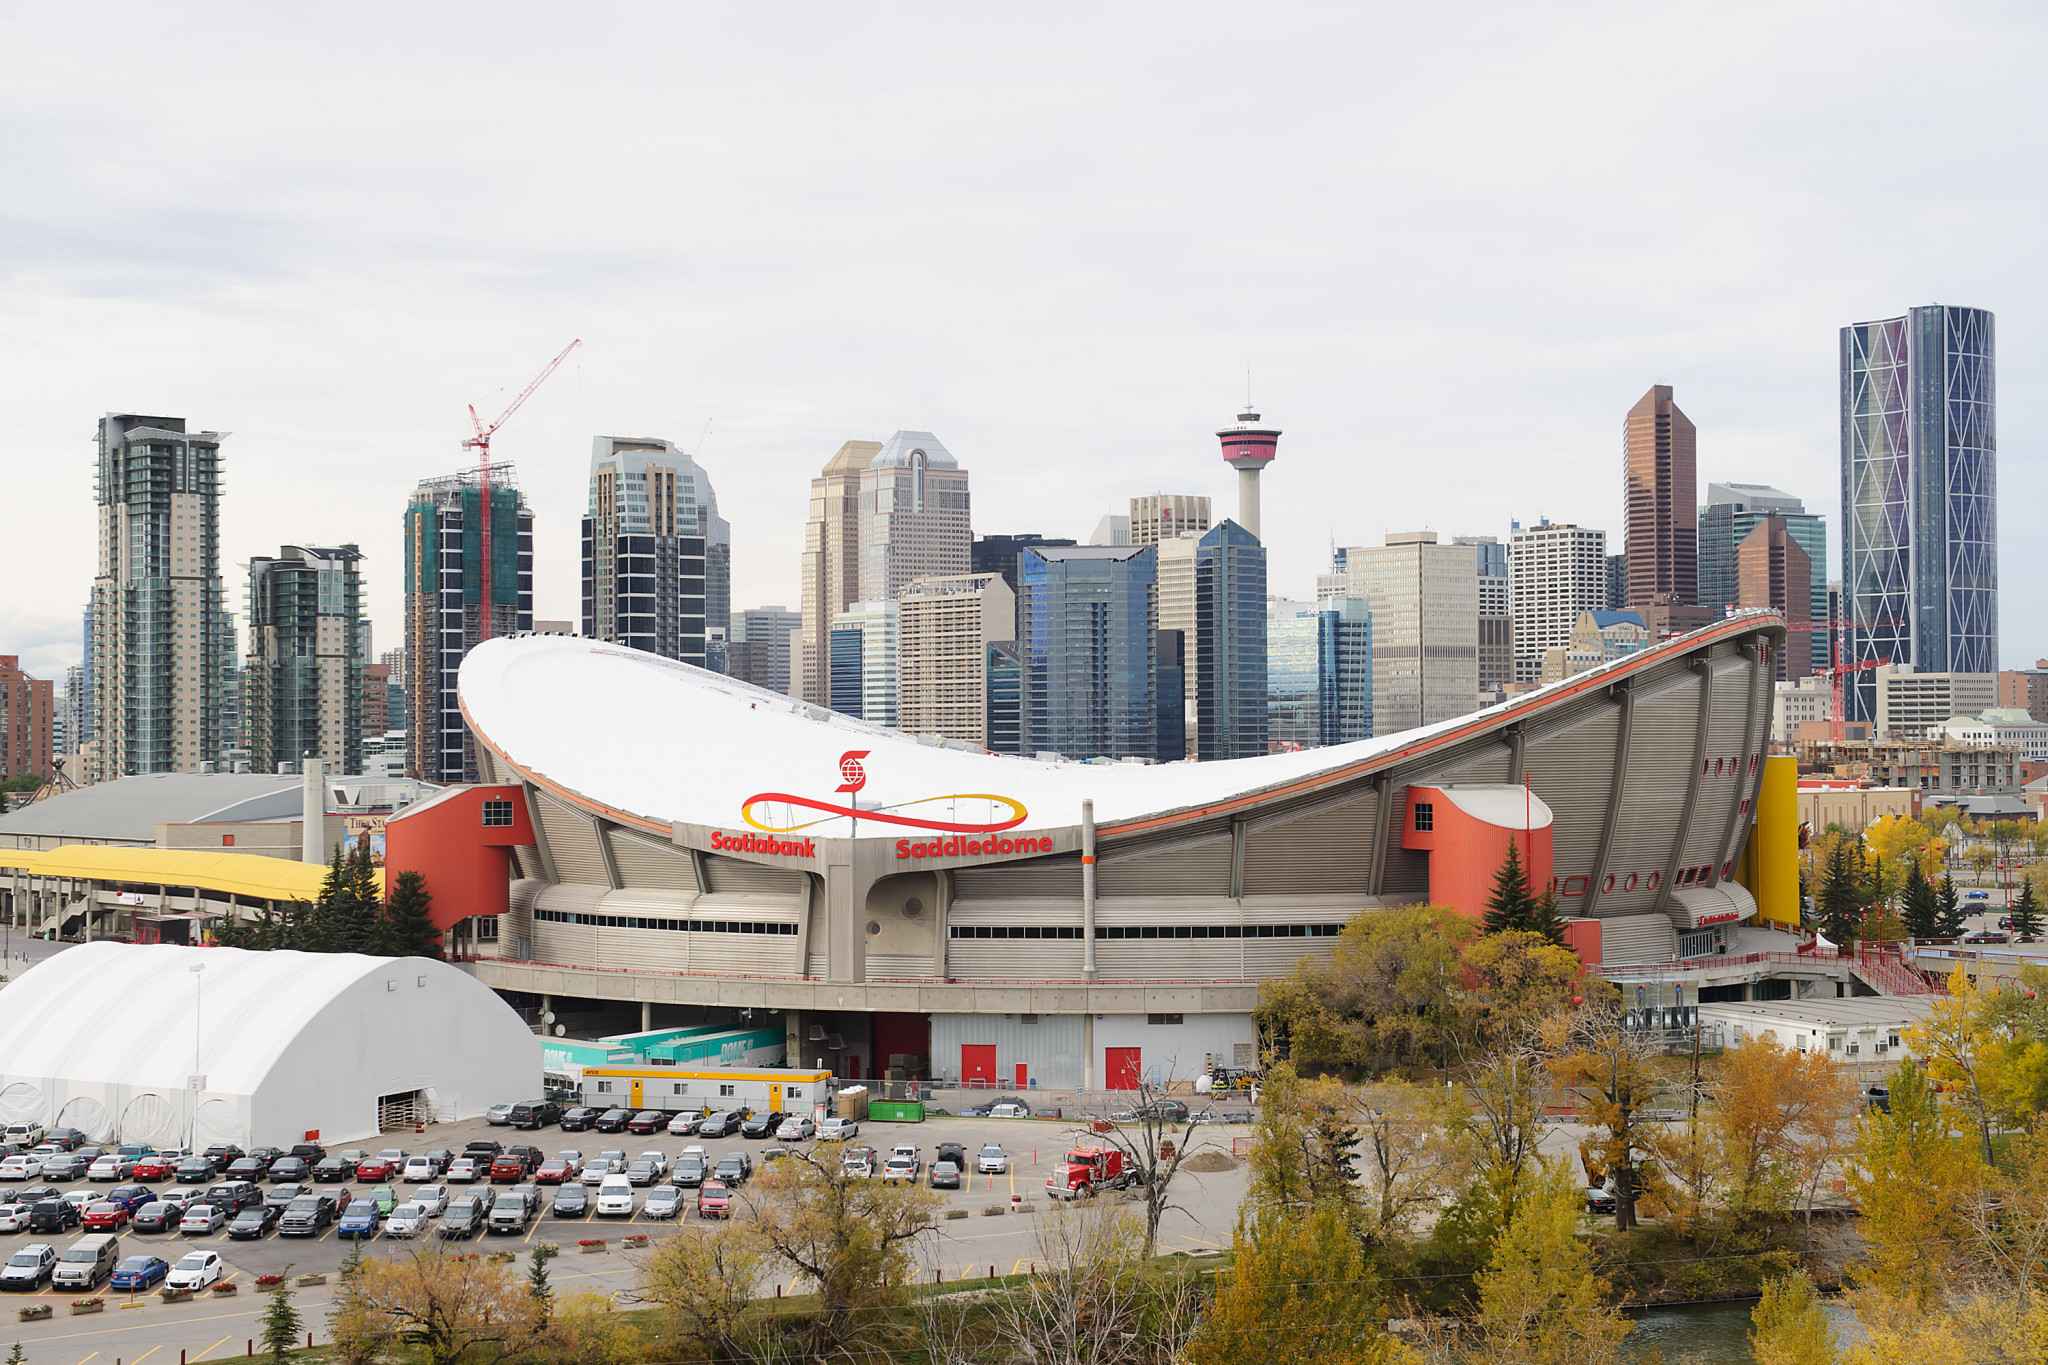 Calgary 2026 has announced the signing of an agreement between the Federal and Provincial Governments to consider a funding proposal that would provide their share of the public dollars needed to stage the Winter Olympics and Paralympics ©Getty Images